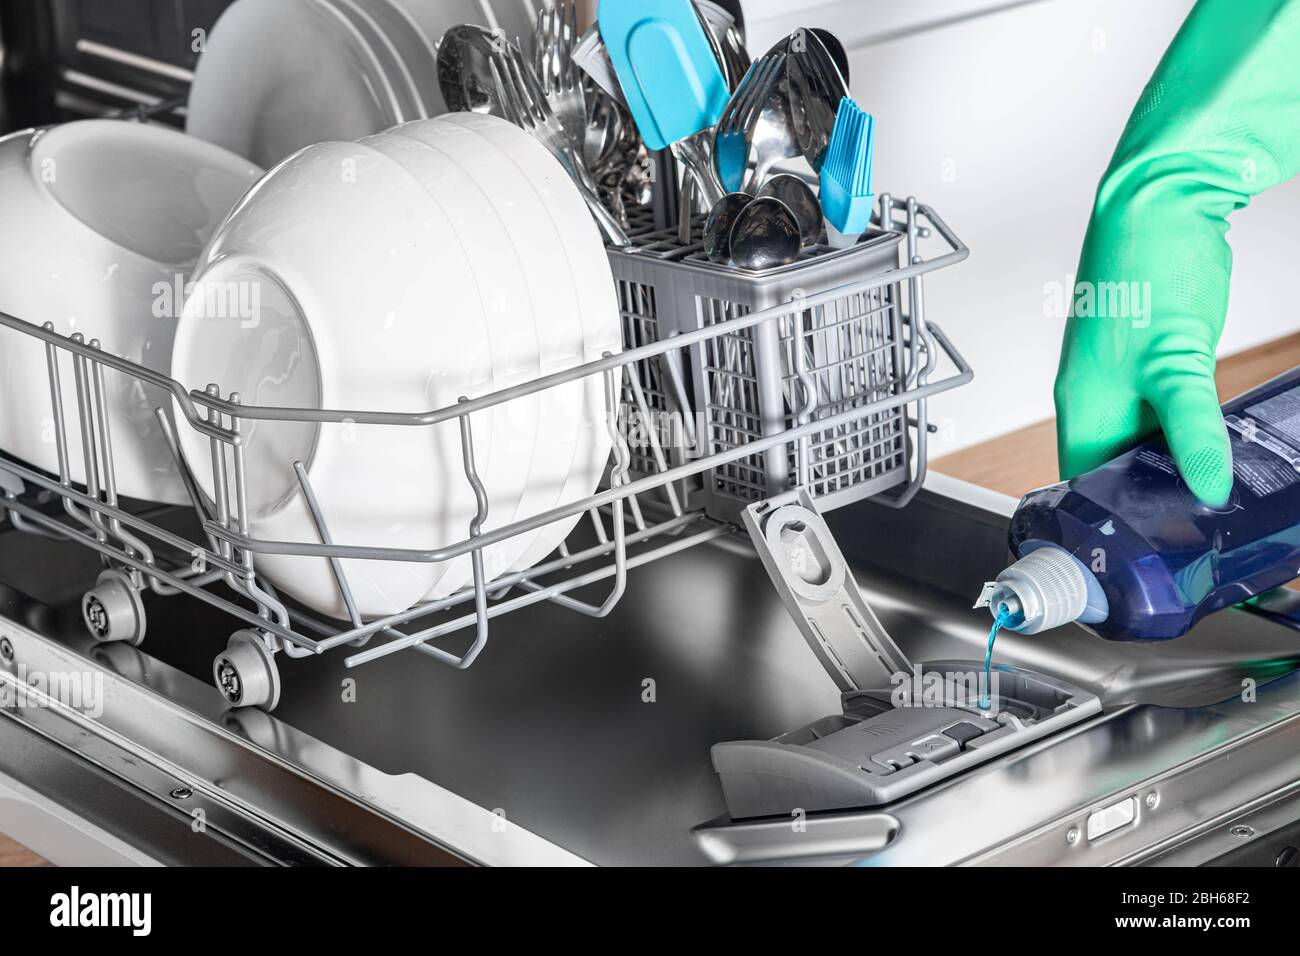 Housewife add rinse aid to dishwasher for clean and shine dishes, close-up  Stock Photo - Alamy